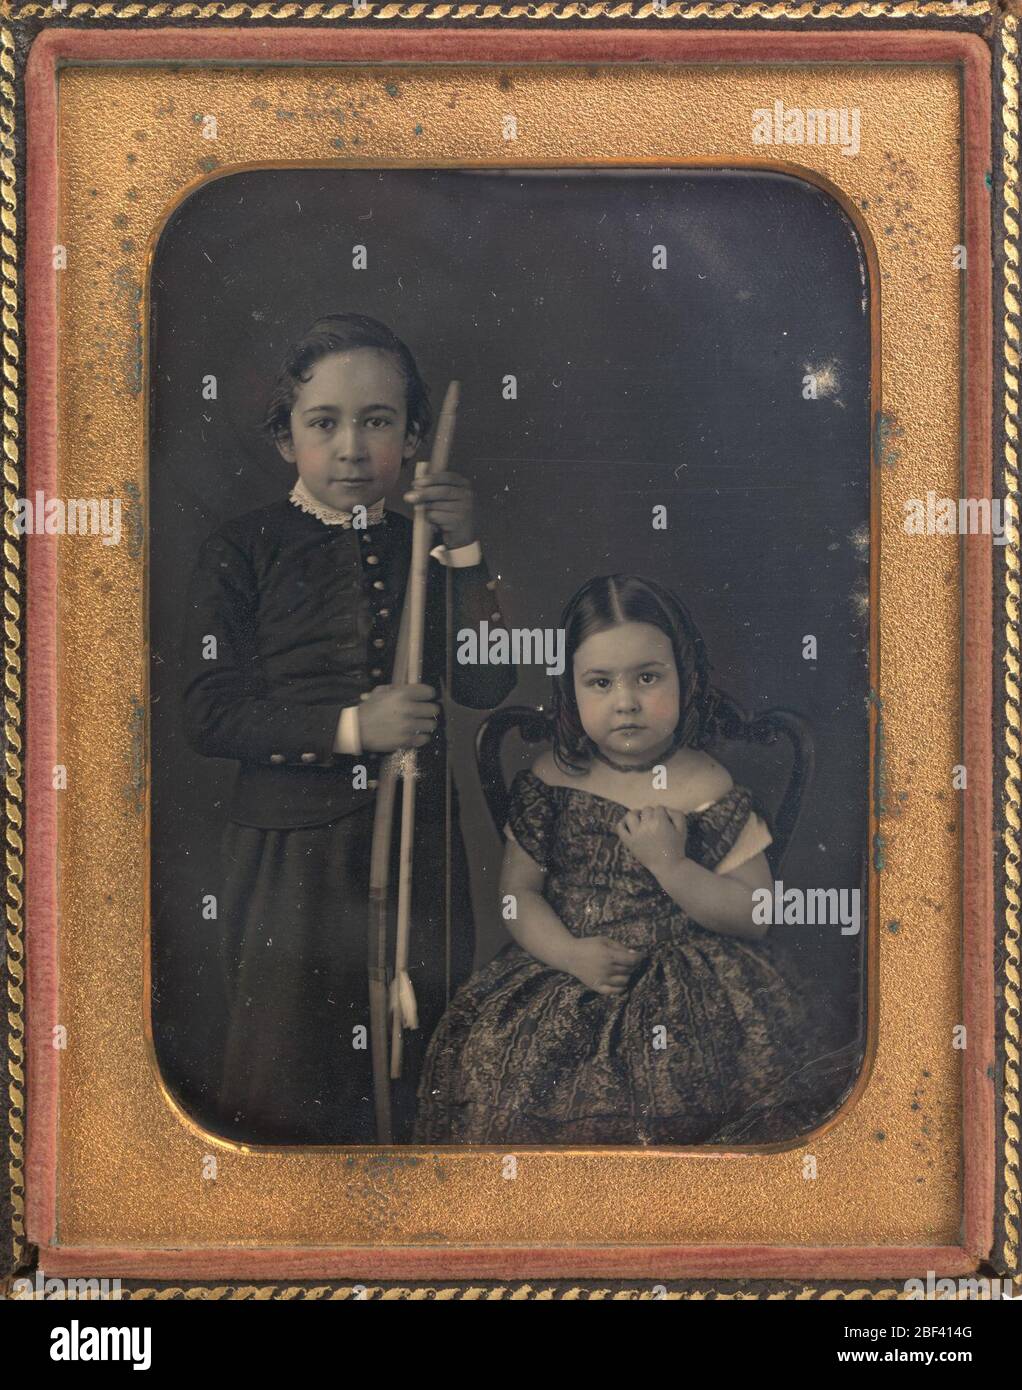 Thomas and Frances Eakins. Thomas Eakins, who would one day be regarded as America's leading realist painter of the nineteenth century, posed with his sister for this portrait when he was about seven years old. Stock Photo